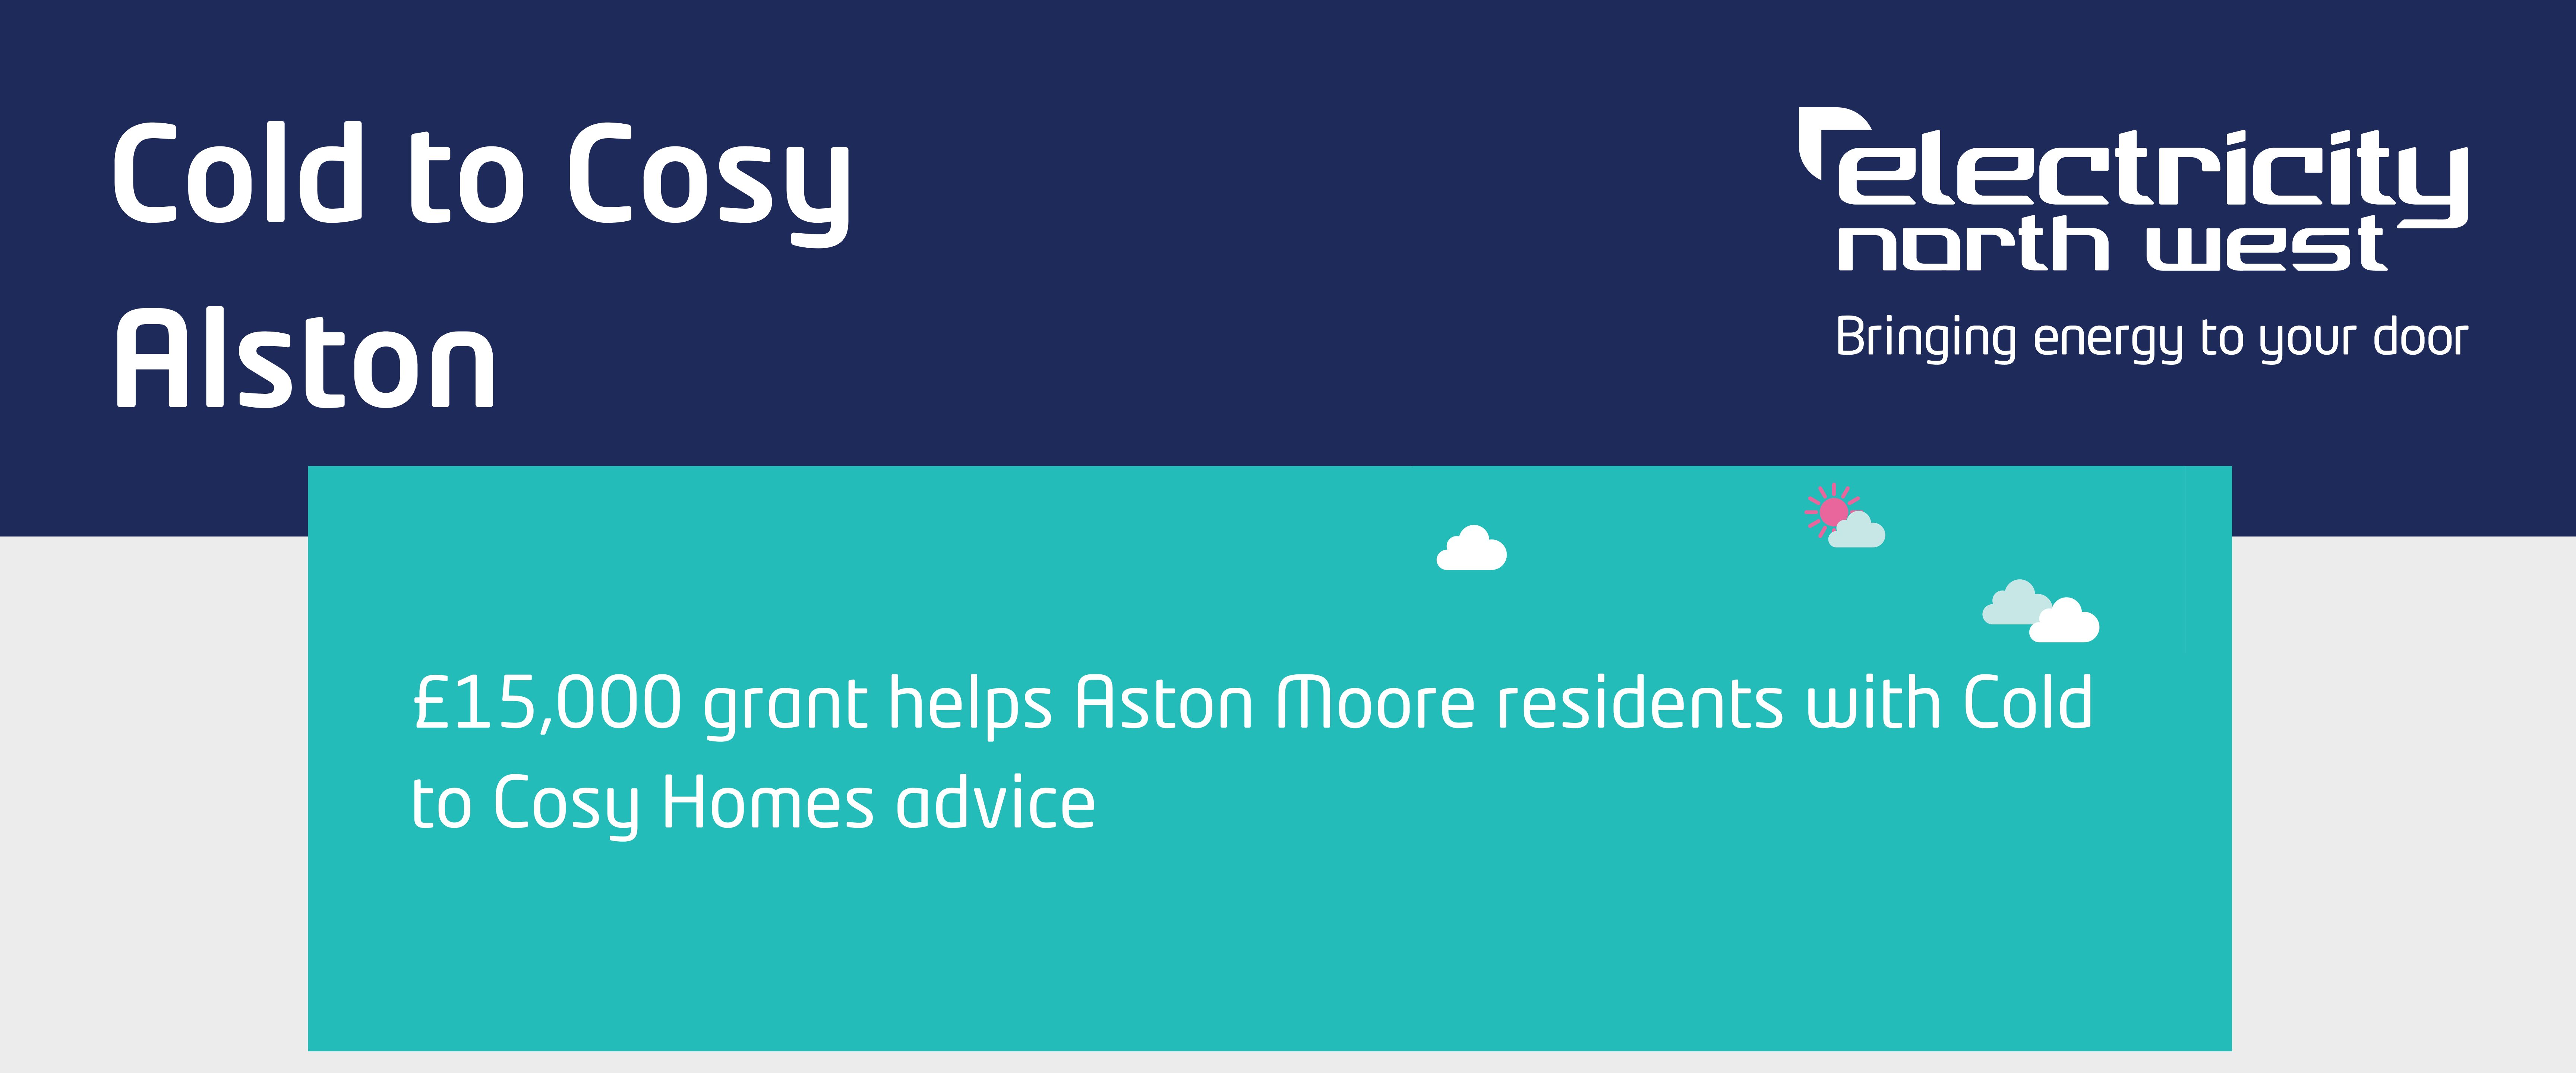 2018 Alston Moor - £15,000 grant helps Aston Moore residents with Cold to Cosy Homes advice